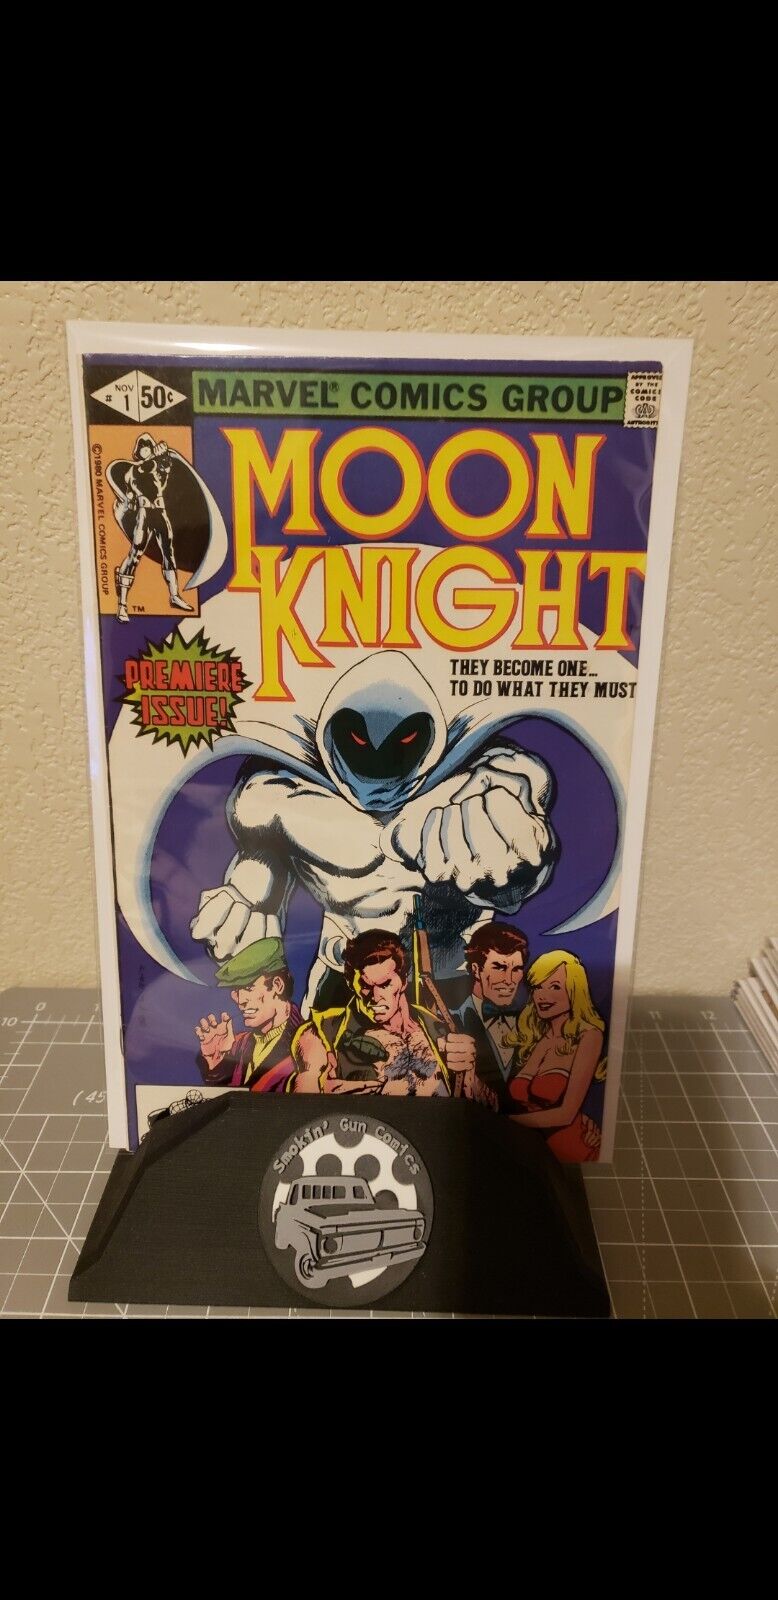 Moon Knight #1 (Marvel Comics November 1980) LOW GRADE Displays Nicely Though 